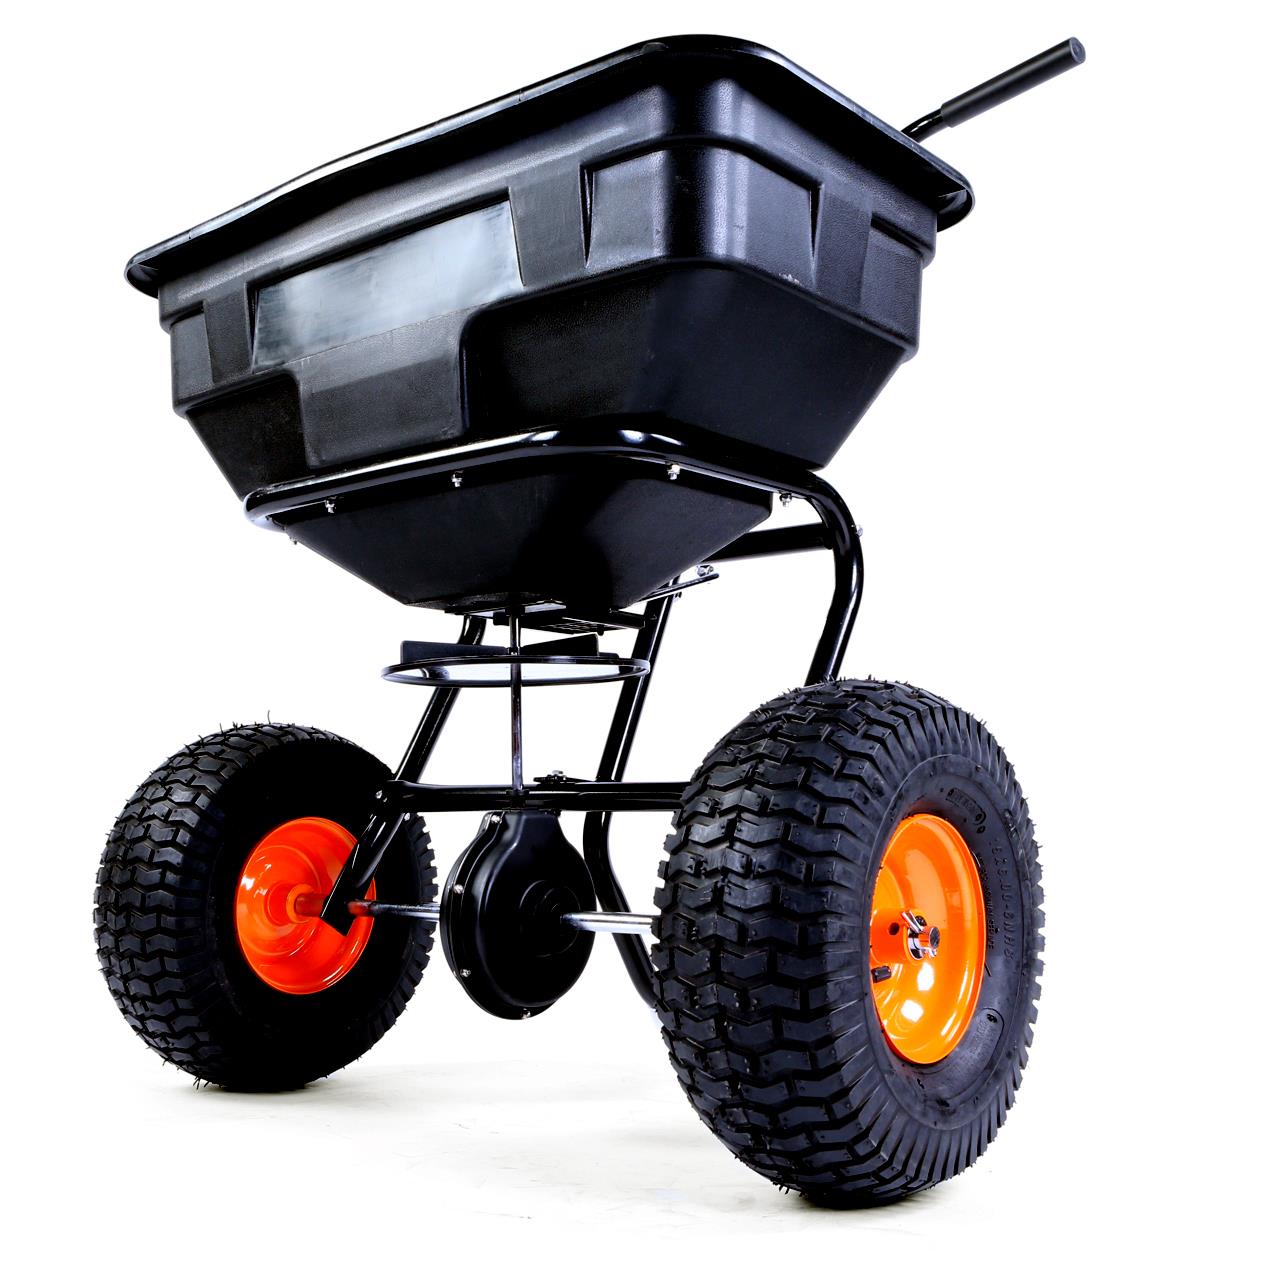 FUXTEC high-quality walk-behind spreader / centrifugal spreader / gritter spreader - for year-round use FX-GS56